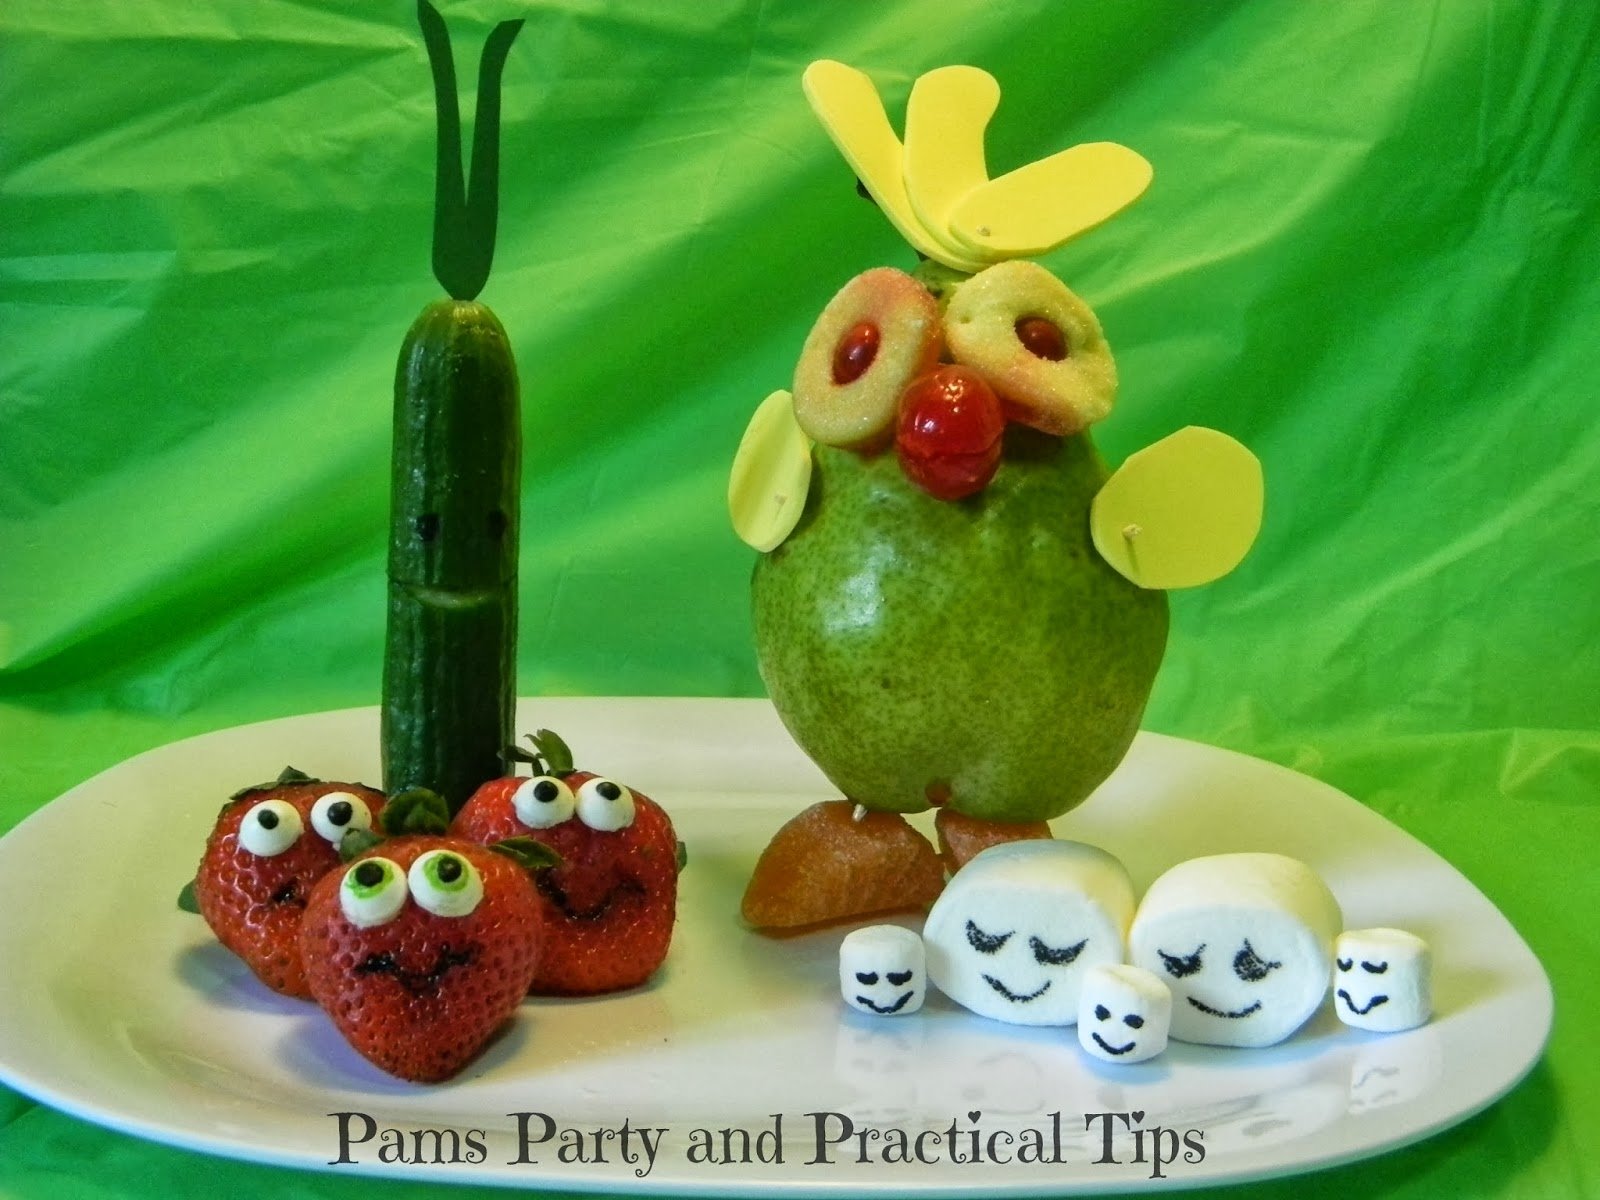 10 Cute Cloudy With A Chance Of Meatballs Party Ideas pams party practical tips cloudy with chance of meatballs 2 1 2022